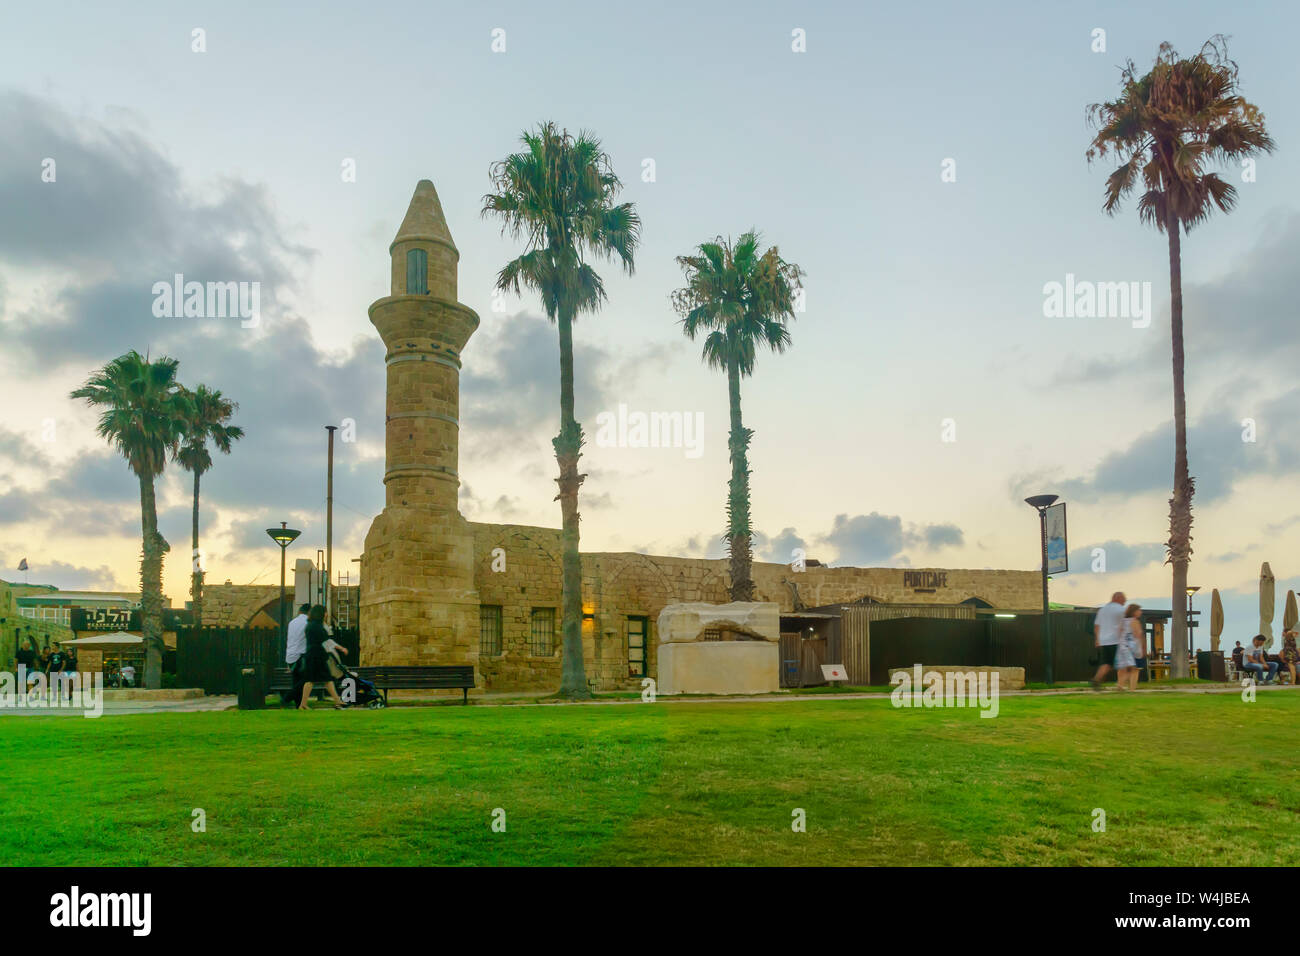 Caesarea, Israel - July 22, 2019: Sunset view of the Bosnian mosque, with visitors, in Caesarea National Park, Northern Israel Stock Photo